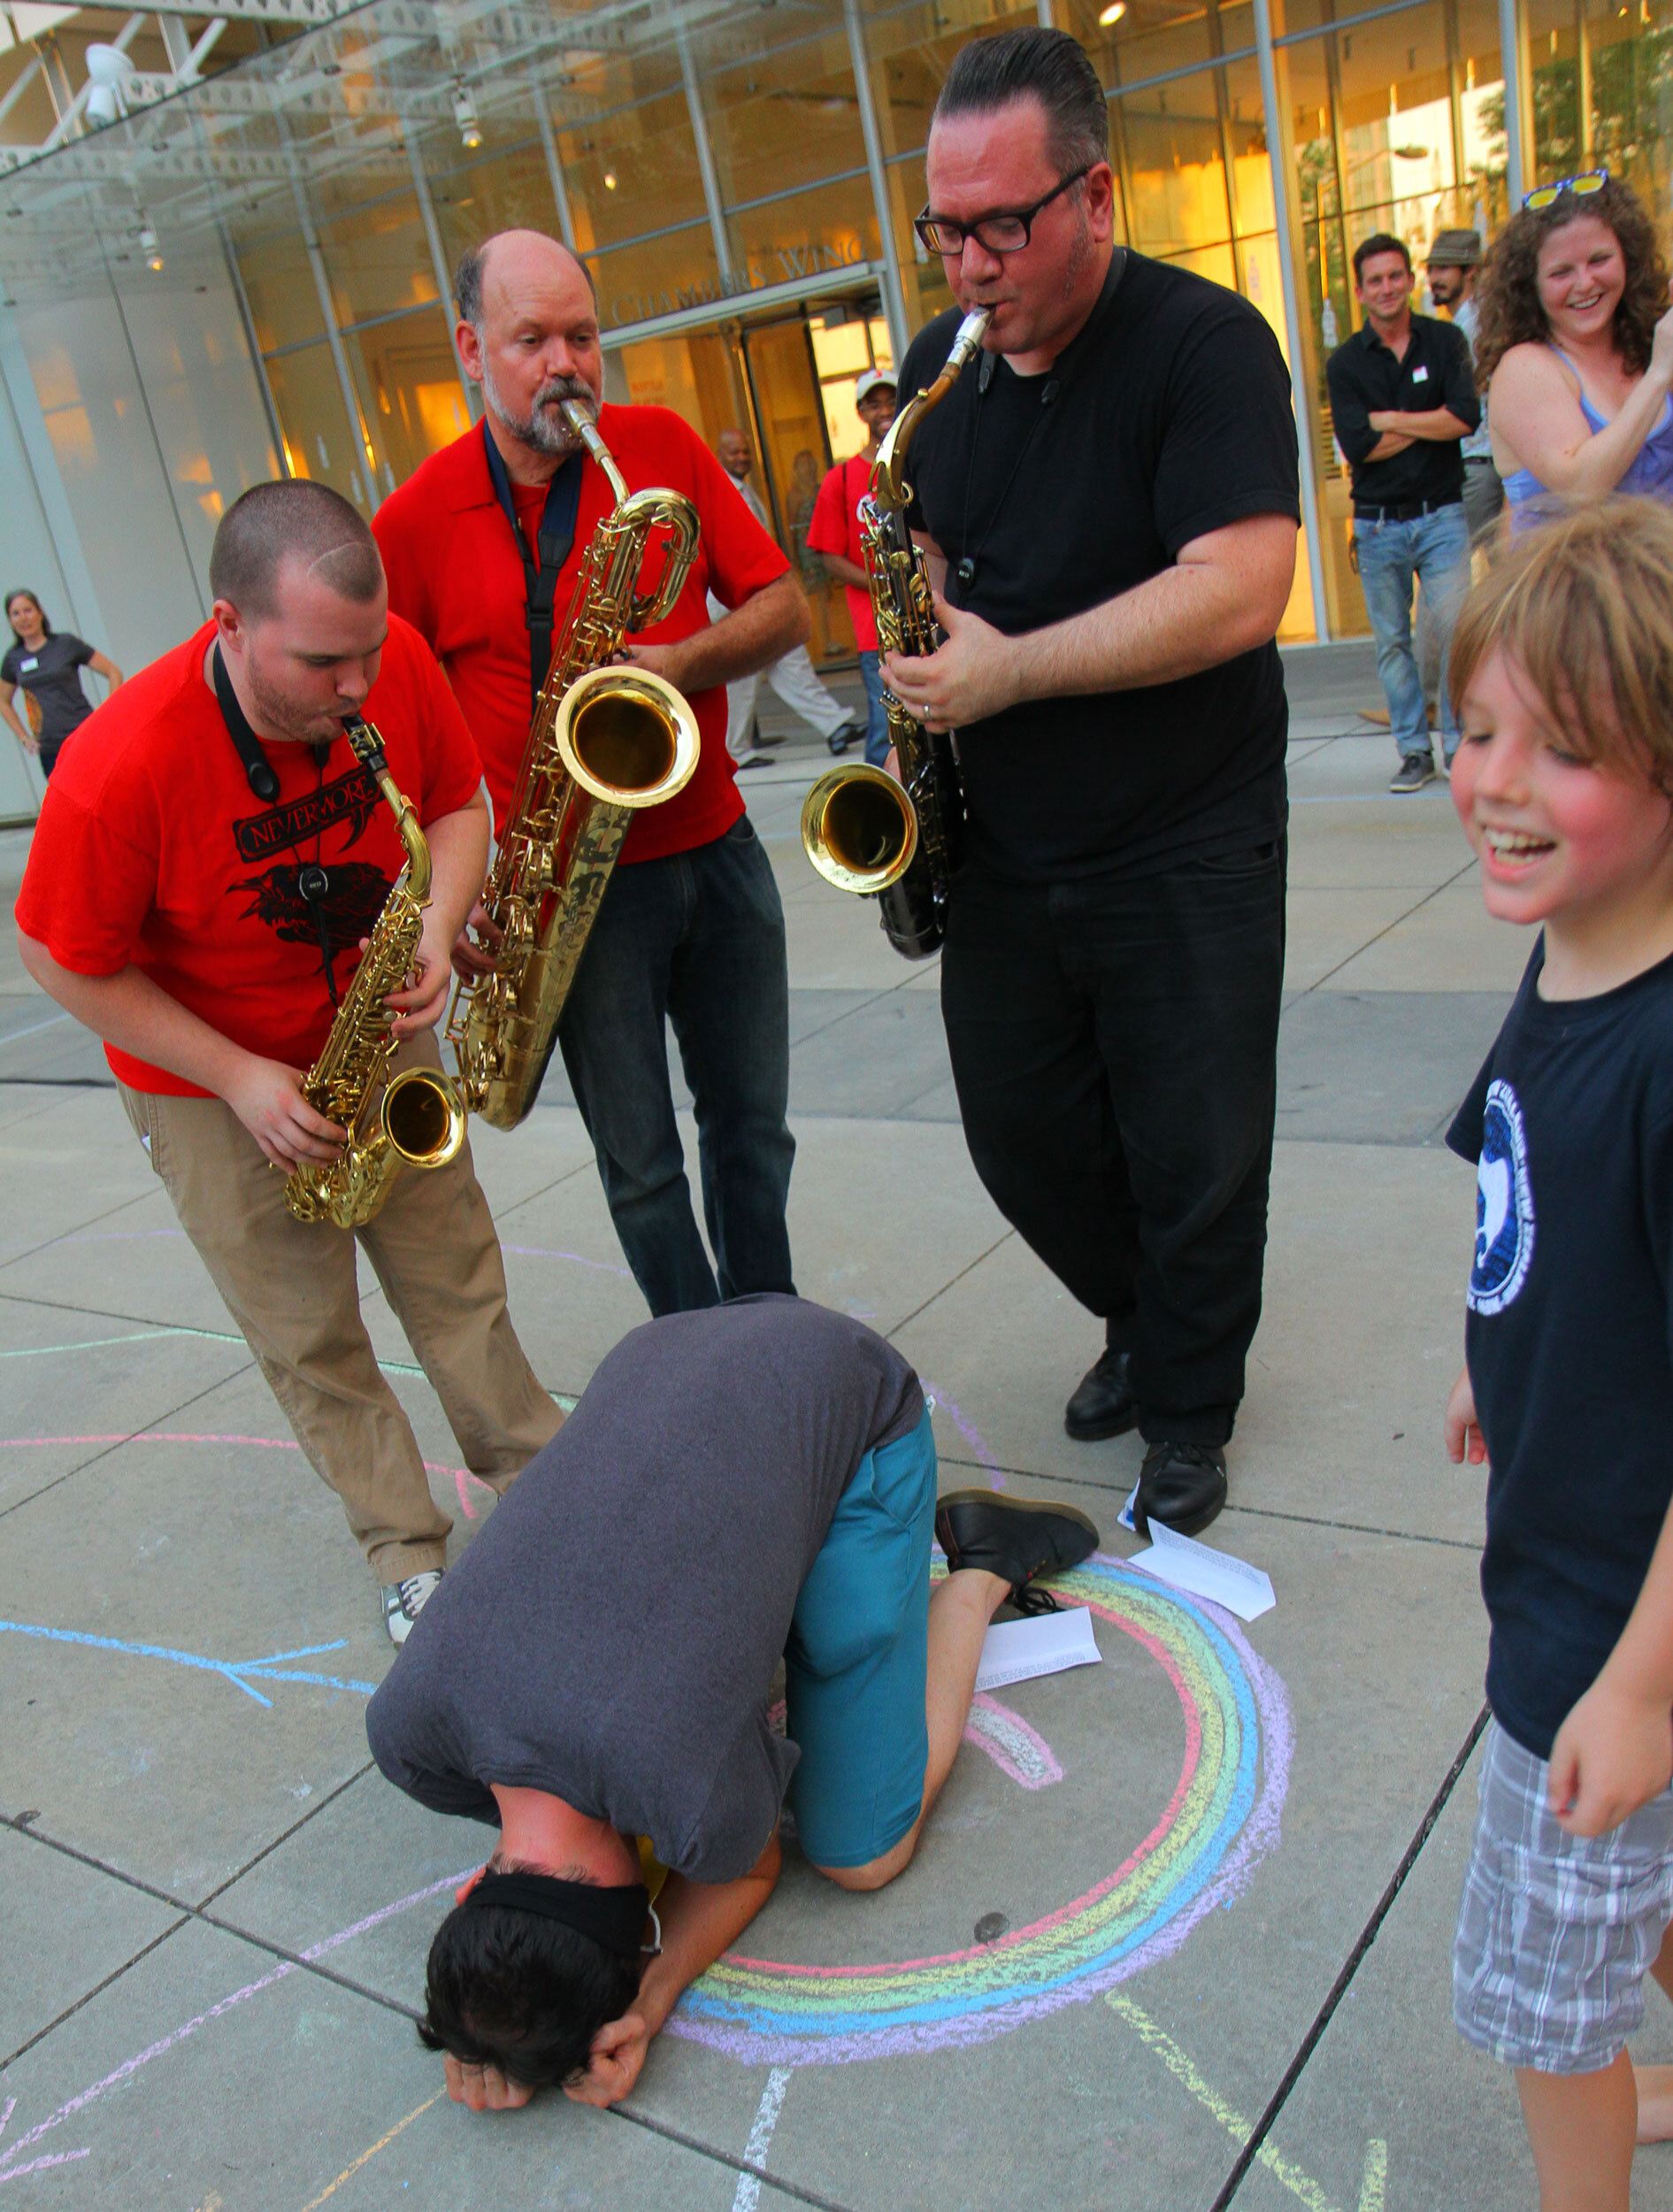 A performer is on the ground on their knees, face down in a gesture of despair. Three musicians stand around them playing saxophones. A boy smiles and laughs nearby.